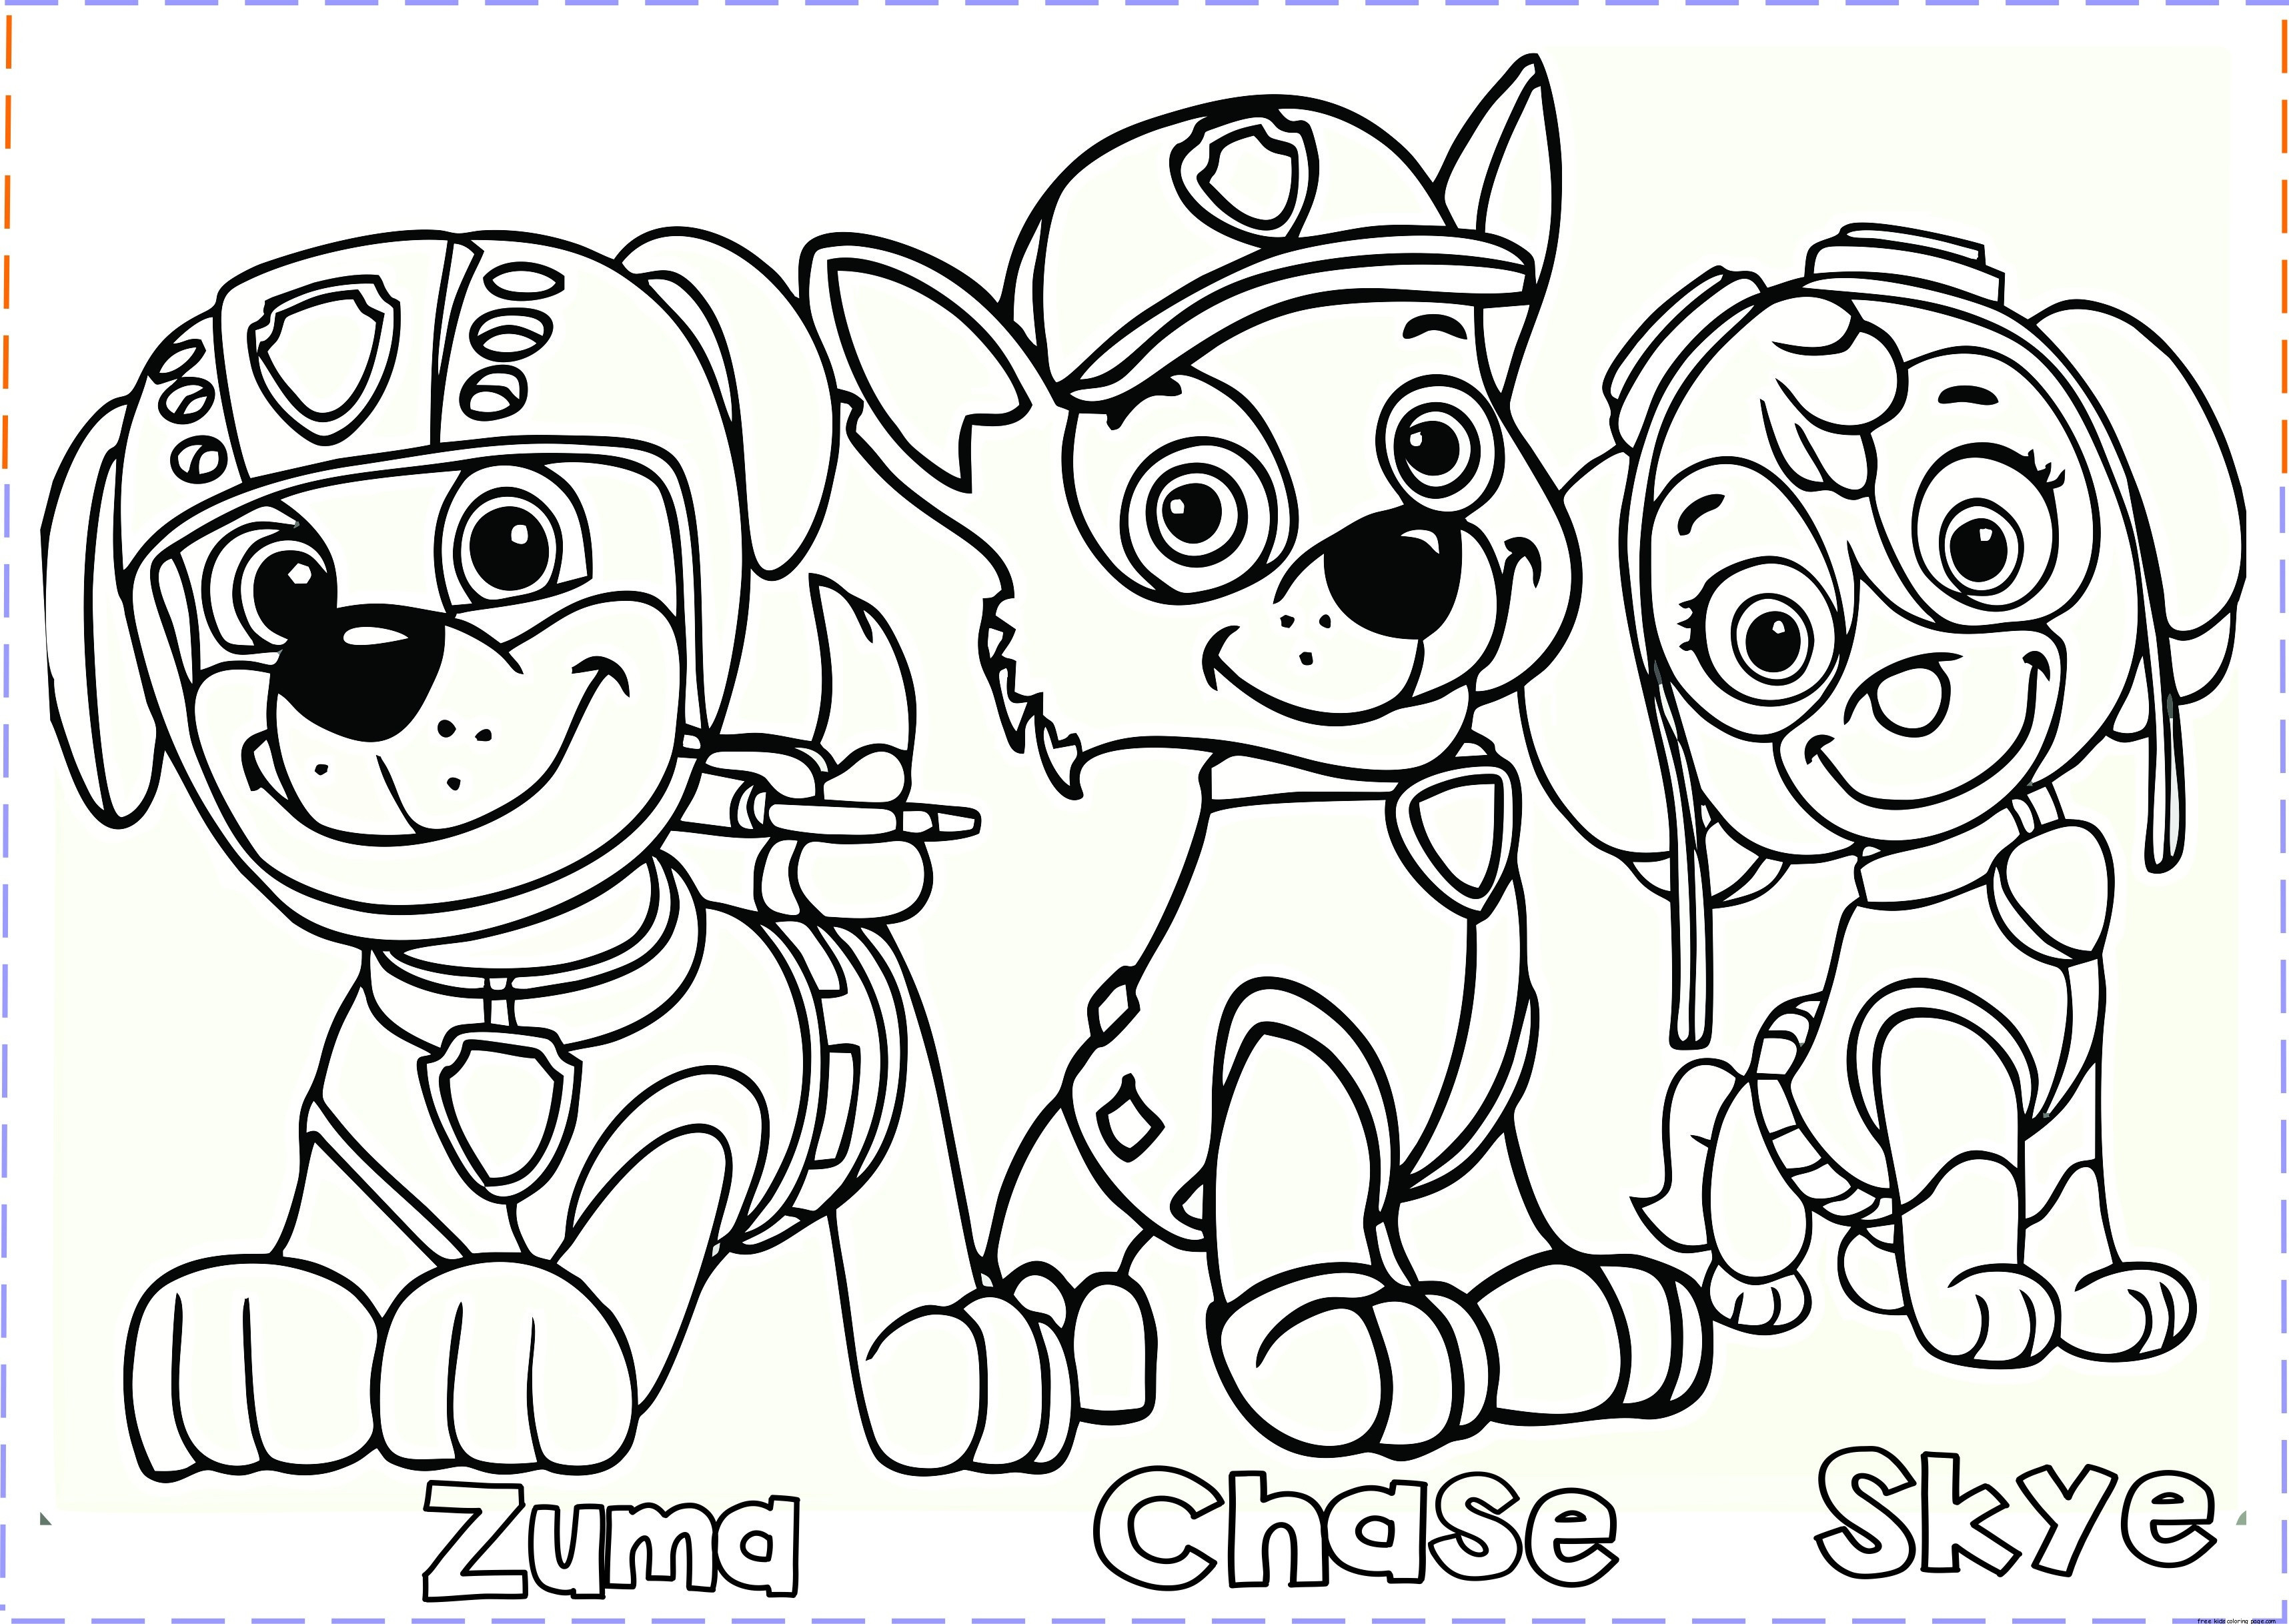 Download Chase Paw Patrol Coloring Page New Pup Patrol Coloring Pages Viranculture - entitlementtrap.com